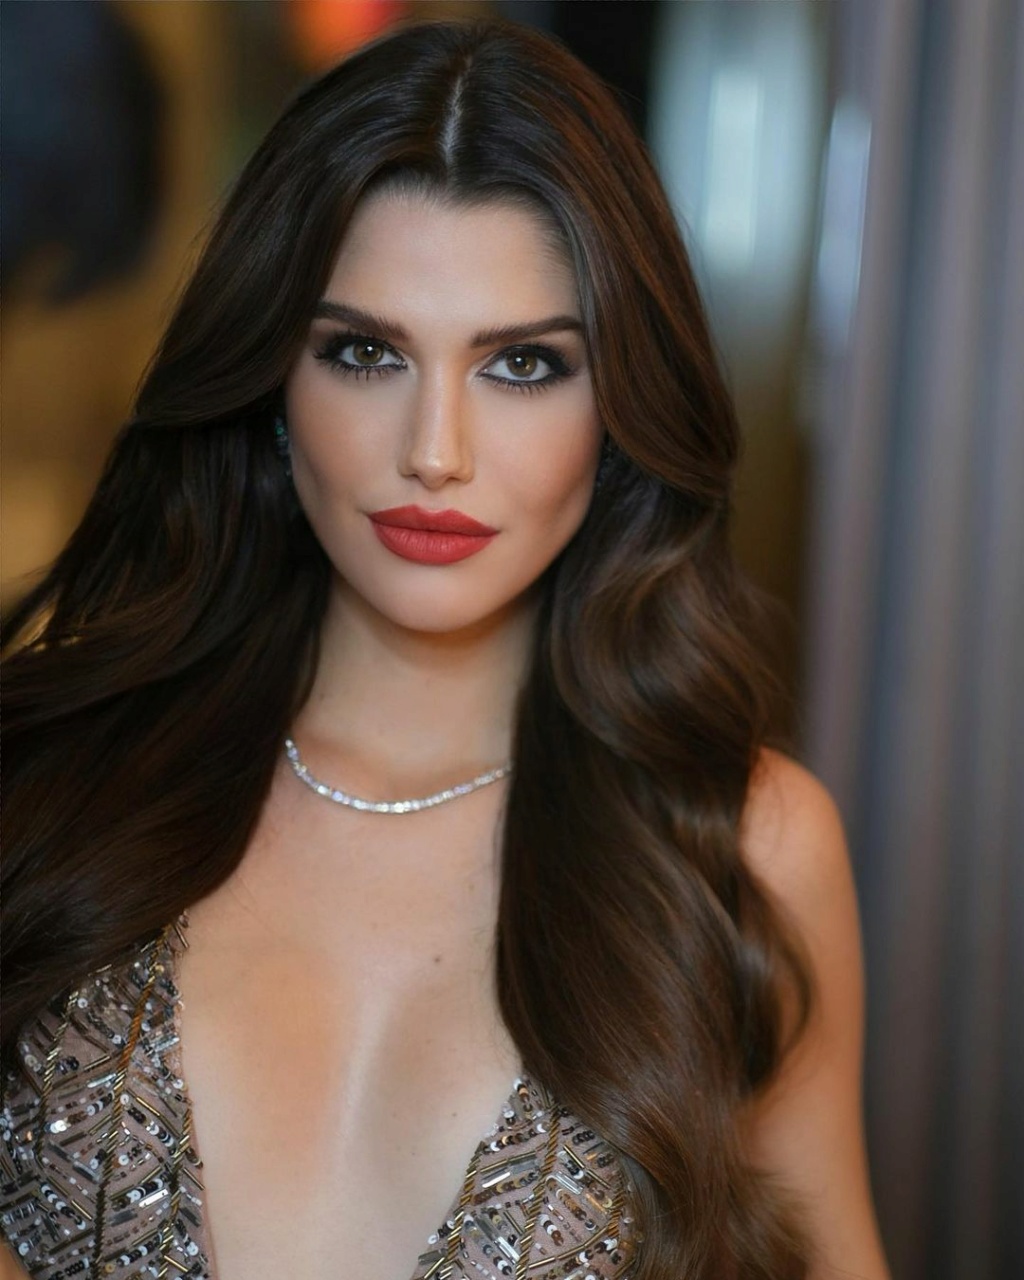 The Official Thread Of MISS GRAND INTERNATIONAL 2022 : ISABELLA MENIN from BRAZIL. - Page 2 32833010